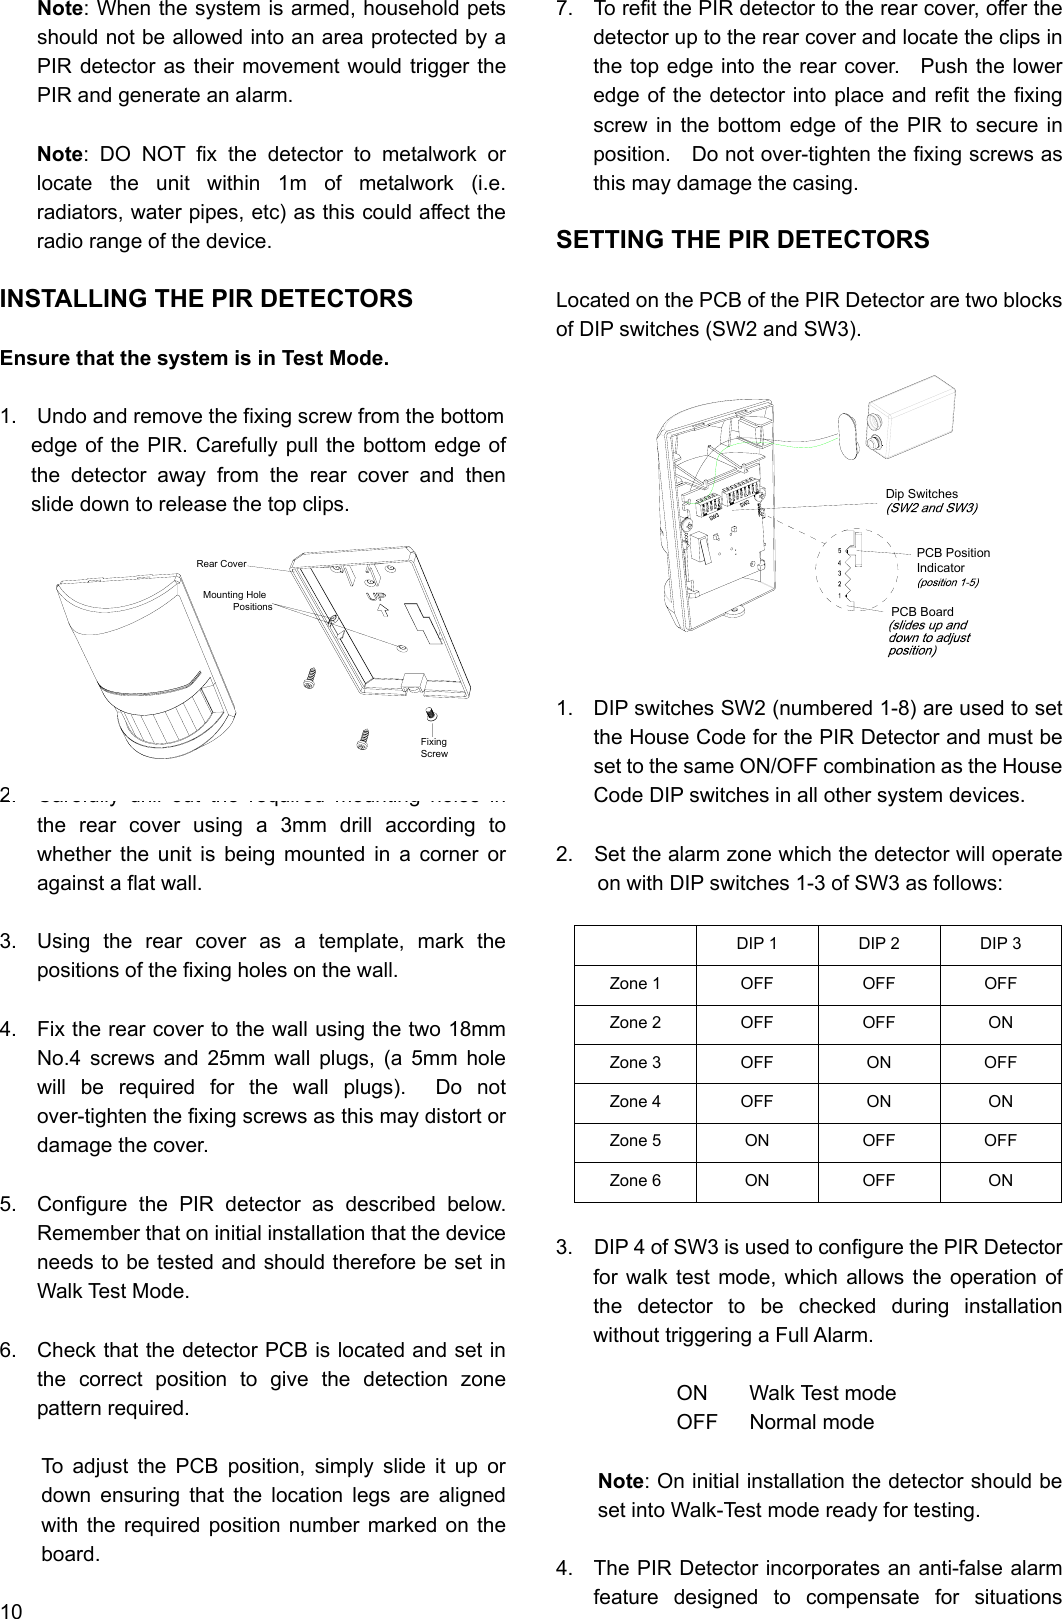 Note: When the system is armed, household pets should not be allowed into an area protected by a PIR detector as their movement would trigger the PIR and generate an alarm.                                             Note: DO NOT fix the detector to metalwork or locate the unit within 1m of metalwork (i.e. radiators, water pipes, etc) as this could affect the radio range of the device.  INSTALLING THE PIR DETECTORS  Ensure that the system is in Test Mode.  1.  Undo and remove the fixing screw from the bottom   edge of the PIR. Carefully pull the bottom edge of the detector away from the rear cover and then slide down to release the top clips.          2.  Carefully drill out the required mounting holes in the rear cover using a 3mm drill according to whether the unit is being mounted in a corner or against a flat wall.  3.  Using the rear cover as a template, mark the positions of the fixing holes on the wall.  4.  Fix the rear cover to the wall using the two 18mm No.4 screws and 25mm wall plugs, (a 5mm hole will be required for the wall plugs).  Do not over-tighten the fixing screws as this may distort or damage the cover.  5.  Configure the PIR detector as described below.  Remember that on initial installation that the device needs to be tested and should therefore be set in   Walk Test Mode.  6.  Check that the detector PCB is located and set in the correct position to give the detection zone pattern required.  To adjust the PCB position, simply slide it up or down ensuring that the location legs are aligned with the required position number marked on the board.  10 7.  To refit the PIR detector to the rear cover, offer the detector up to the rear cover and locate the clips in the top edge into the rear cover.    Push the lower edge of the detector into place and refit the fixing screw in the bottom edge of the PIR to secure in position.  Do not over-tighten the fixing screws as this may damage the casing.  SETTING THE PIR DETECTORS  Located on the PCB of the PIR Detector are two blocks of DIP switches (SW2 and SW3).                    1.  DIP switches SW2 (numbered 1-8) are used to set the House Code for the PIR Detector and must be set to the same ON/OFF combination as the House Code DIP switches in all other system devices.  2.    Set the alarm zone which the detector will operate on with DIP switches 1-3 of SW3 as follows:   DIP 1  DIP 2  DIP 3 Zone 1  OFF  OFF  OFF Zone 2  OFF  OFF  ON Zone 3  OFF  ON  OFF Zone 4  OFF  ON  ON Zone 5  ON  OFF  OFF Zone 6  ON  OFF  ON  3.    DIP 4 of SW3 is used to configure the PIR Detector for walk test mode, which allows the operation of the detector to be checked during installation without triggering a Full Alarm.  ON    Walk Test mode OFF   Normal mode  Note: On initial installation the detector should be set into Walk-Test mode ready for testing.  4.  The PIR Detector incorporates an anti-false alarm feature designed to compensate for situations Rear CoverMounting Hole           PositionsScrewFixingIndicatorPCB PositionPCB BoardDip Switches